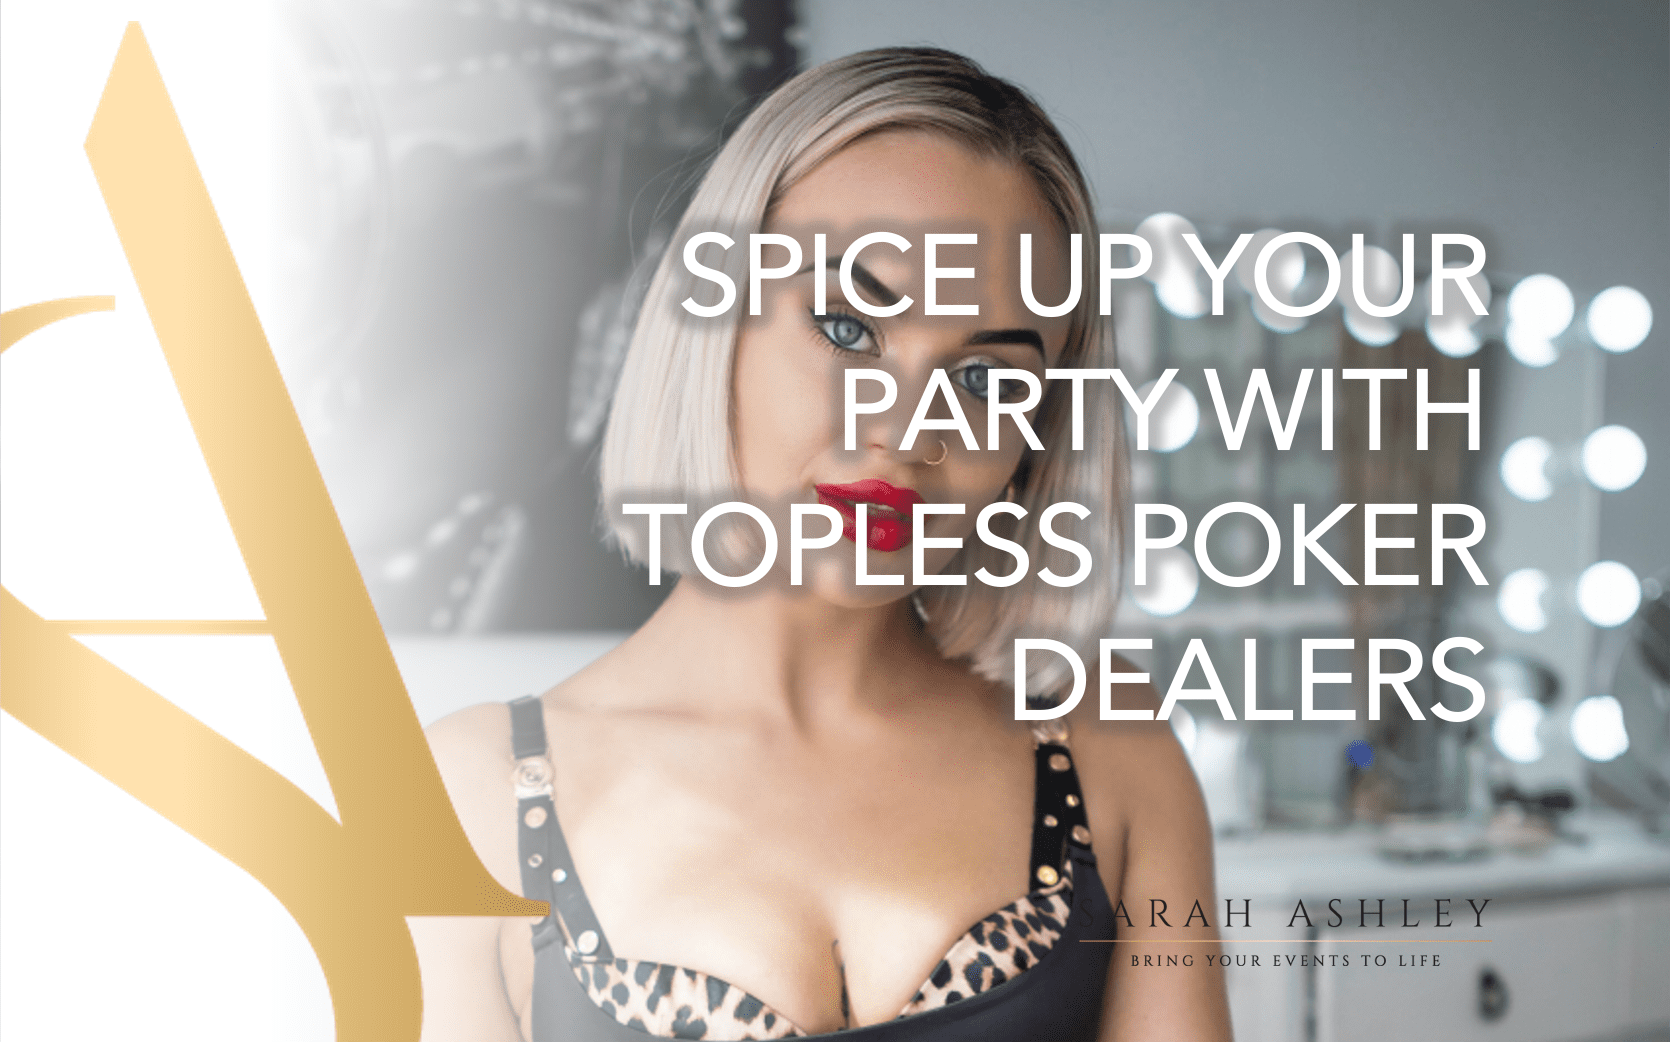 Spice Up Your Party With Topless Poker Dealers! Sarah Ashley